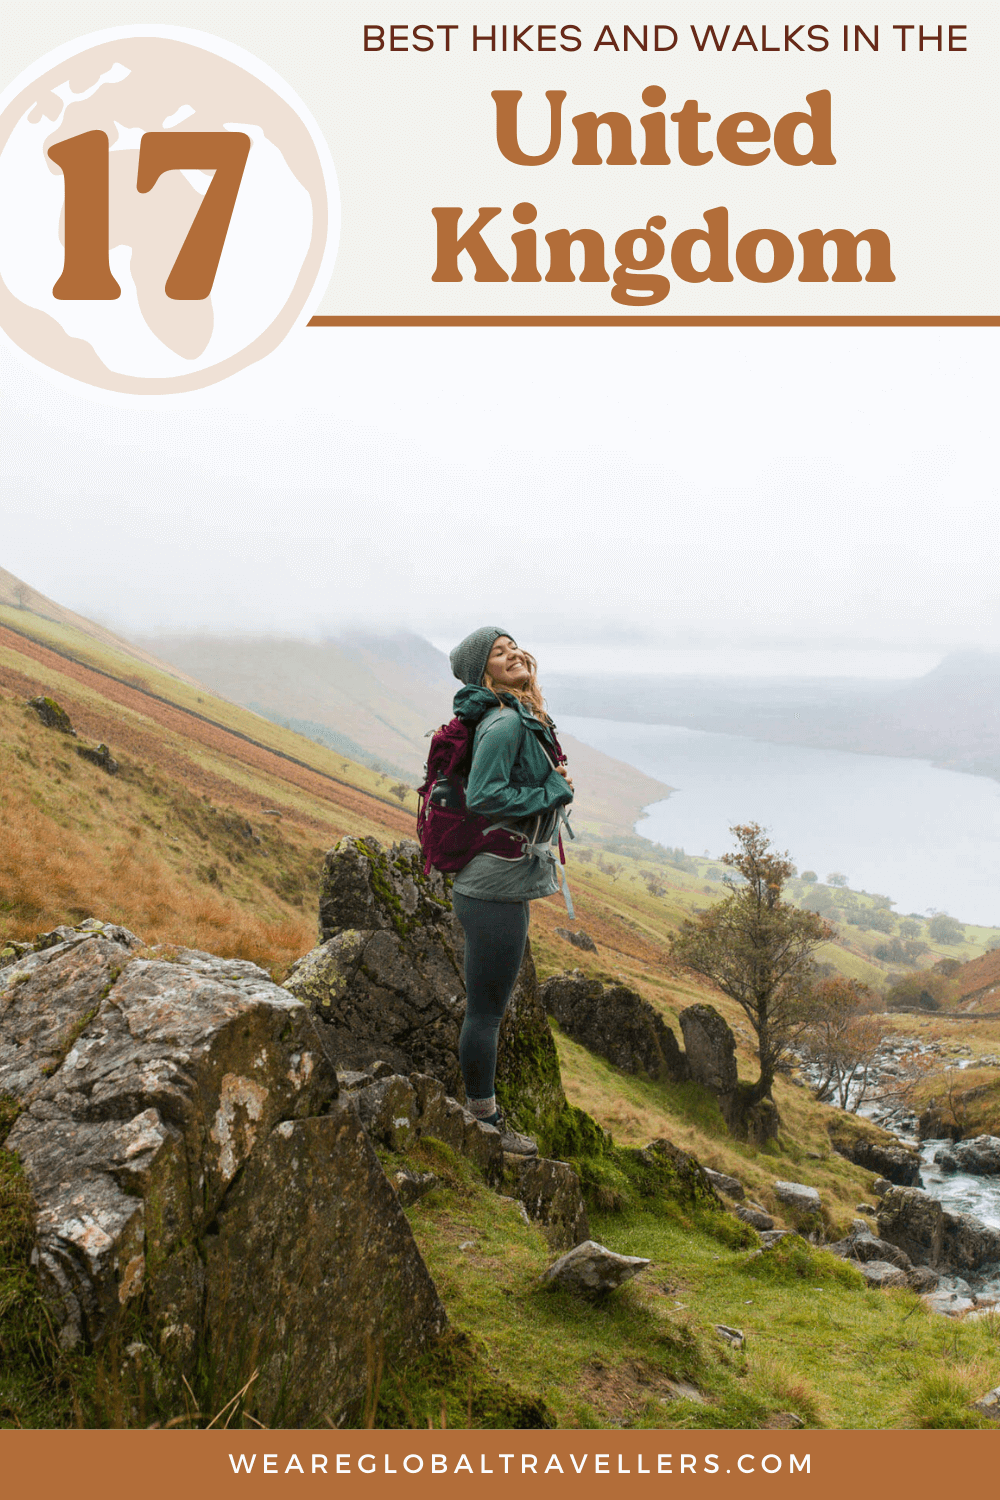 The best hikes and walks in the UK